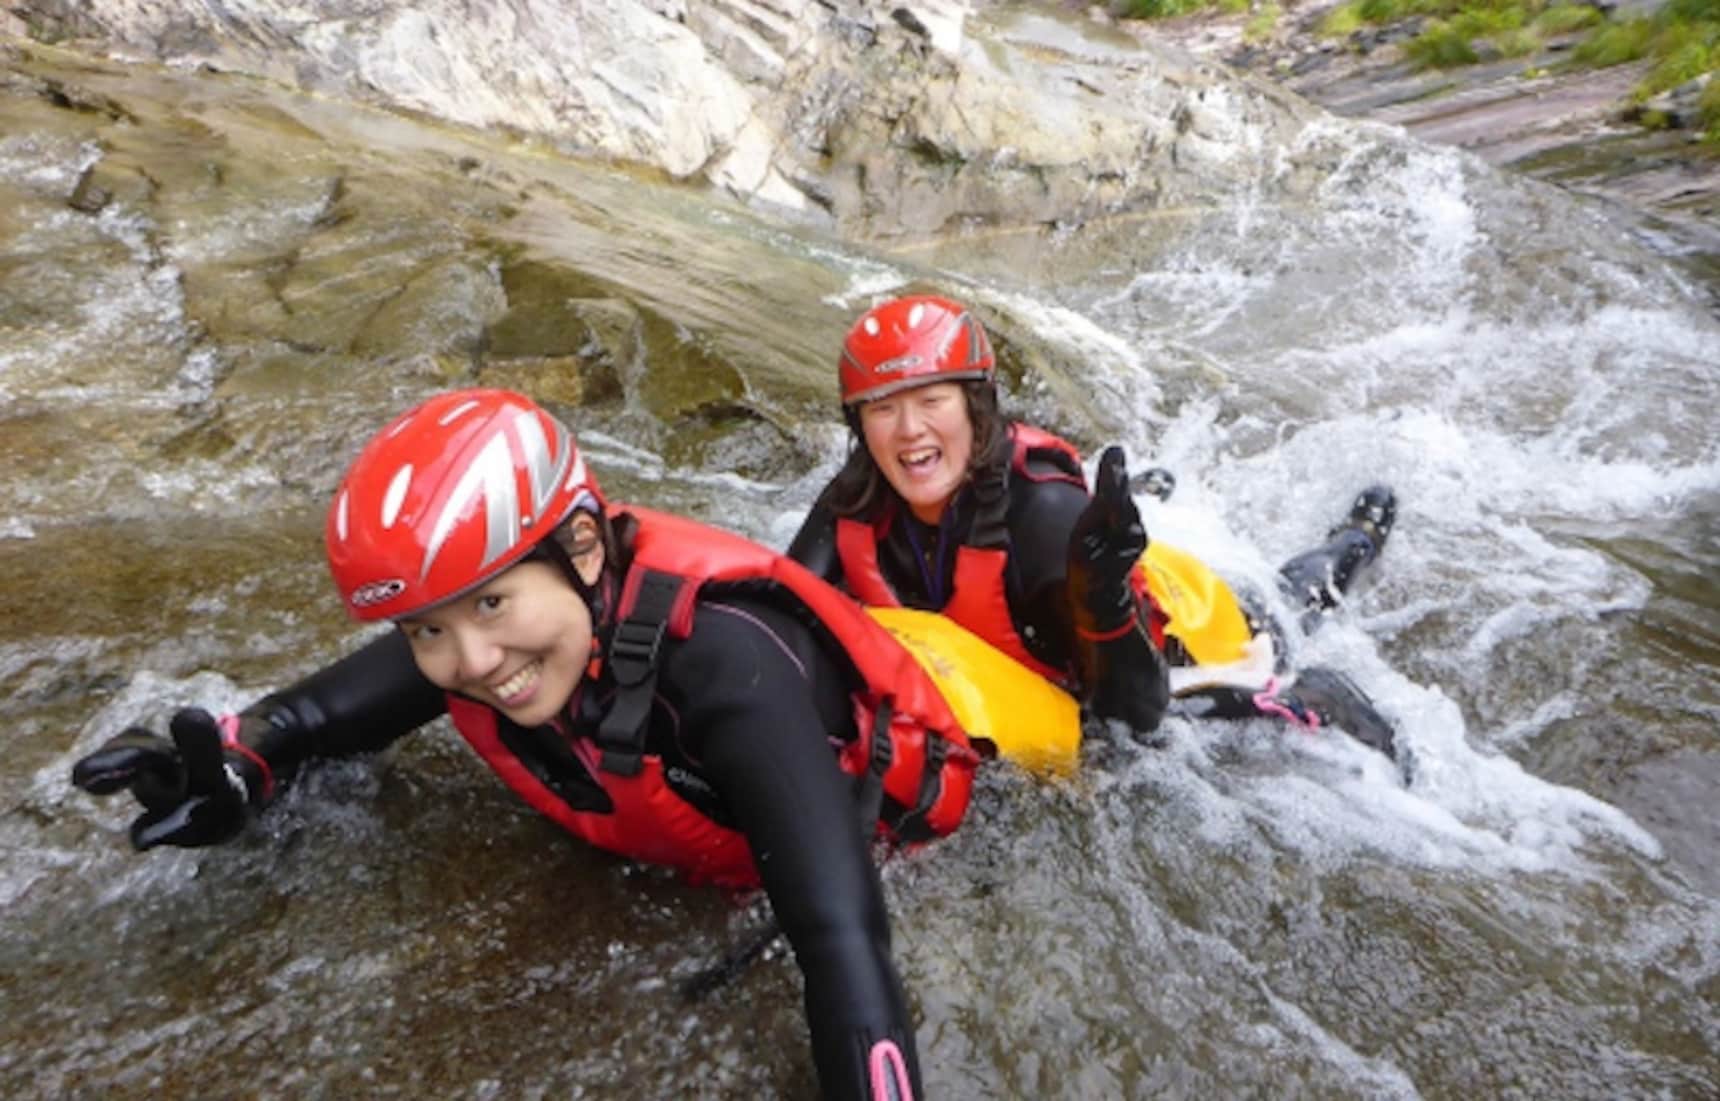 13 Places to Go Canyoning in Japan